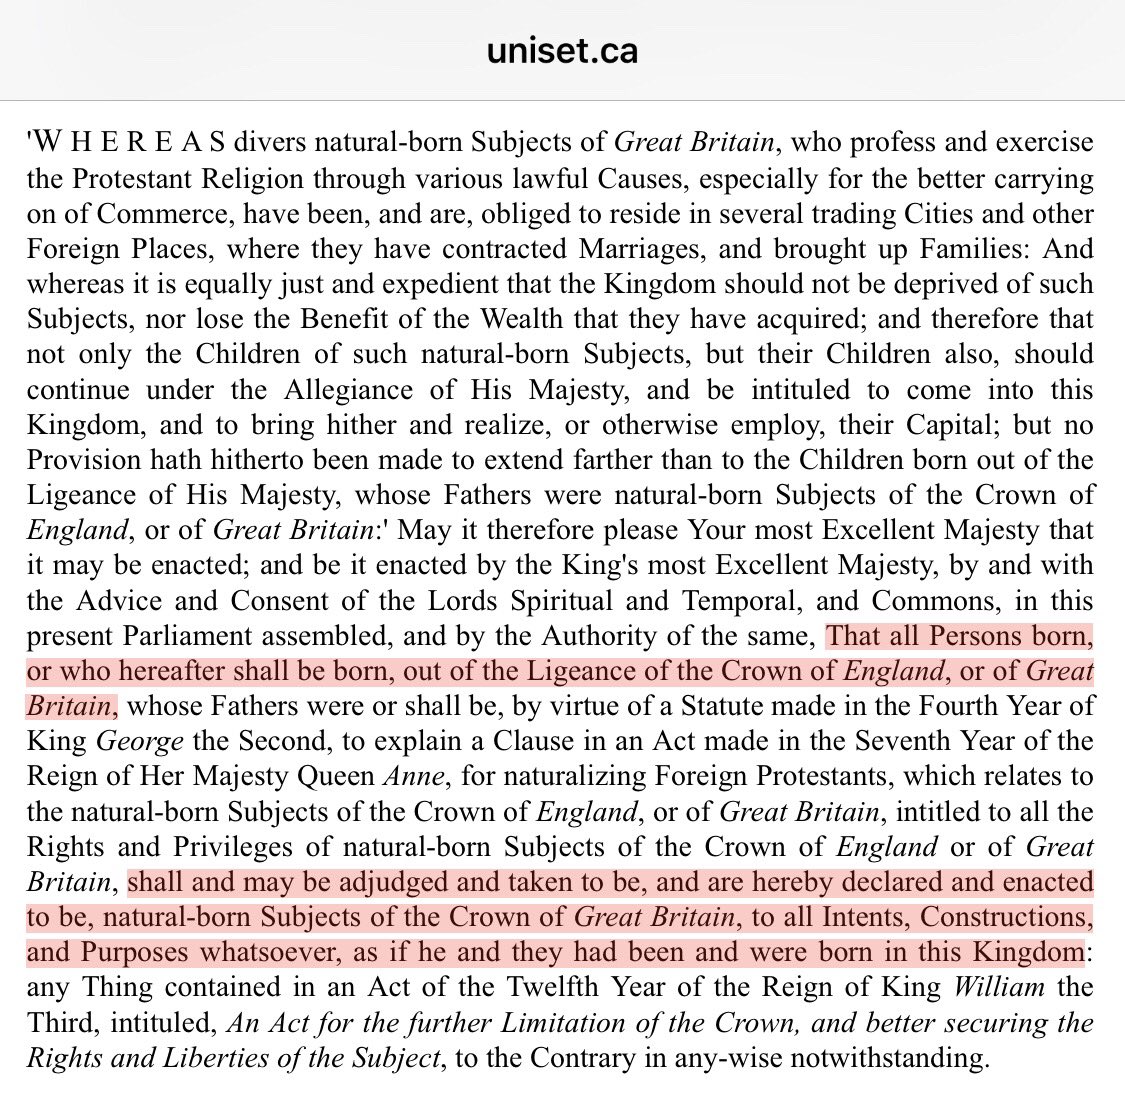 The 1772 edition of the BNA has since been repealed and replaced by a normally-worded statute, but here's the key languageBasically if you were born in the Empire, you were a citizen of – and subject to – the Crown http://www.uniset.ca/naty/BNA1772.htm